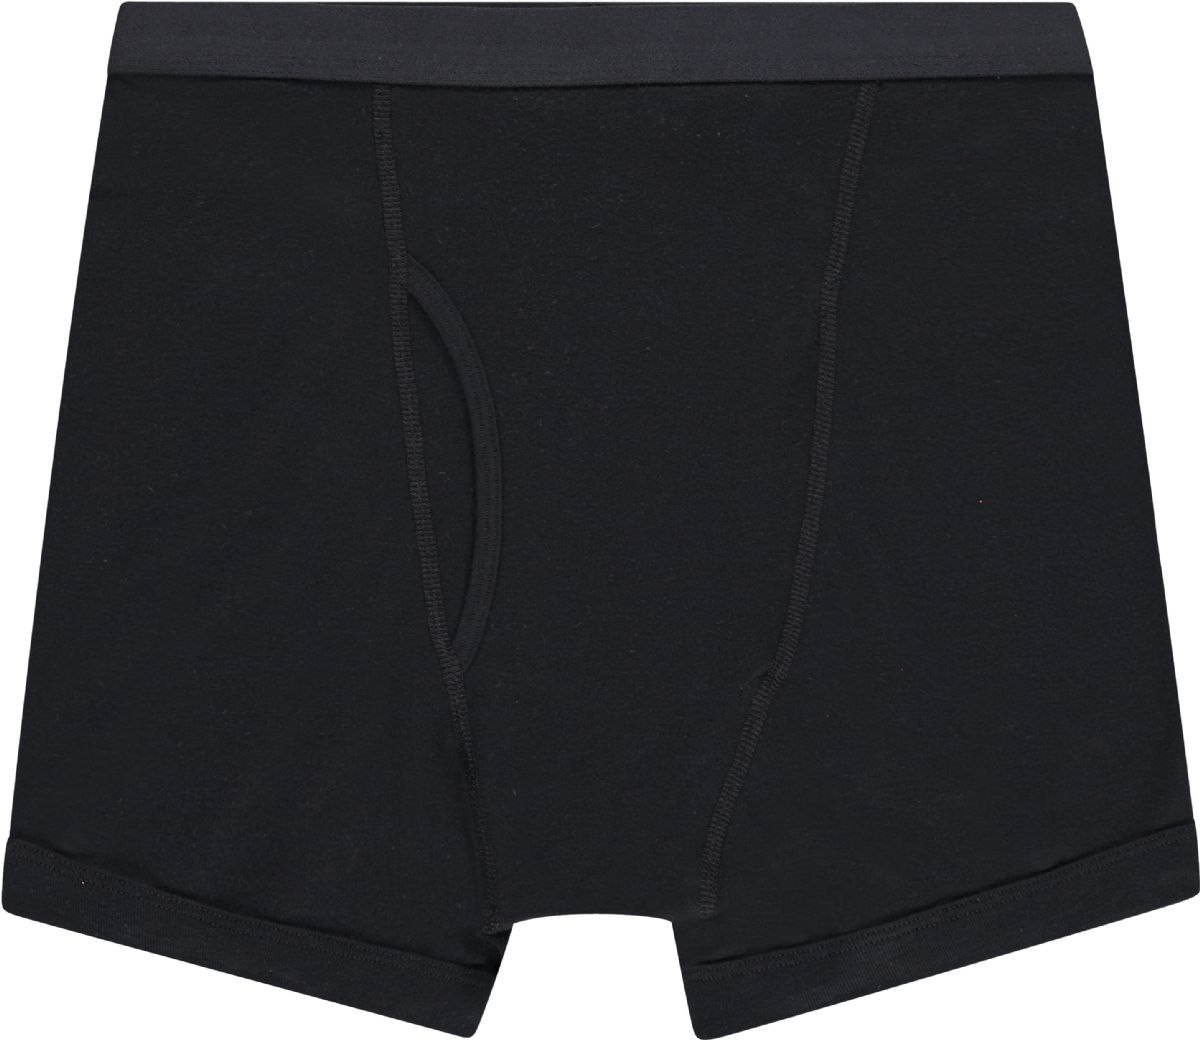 Mens Imperfect Wholesale Gildan Boxer Briefs, Assorted Sizes And Colors -  Mens Underwear - at 